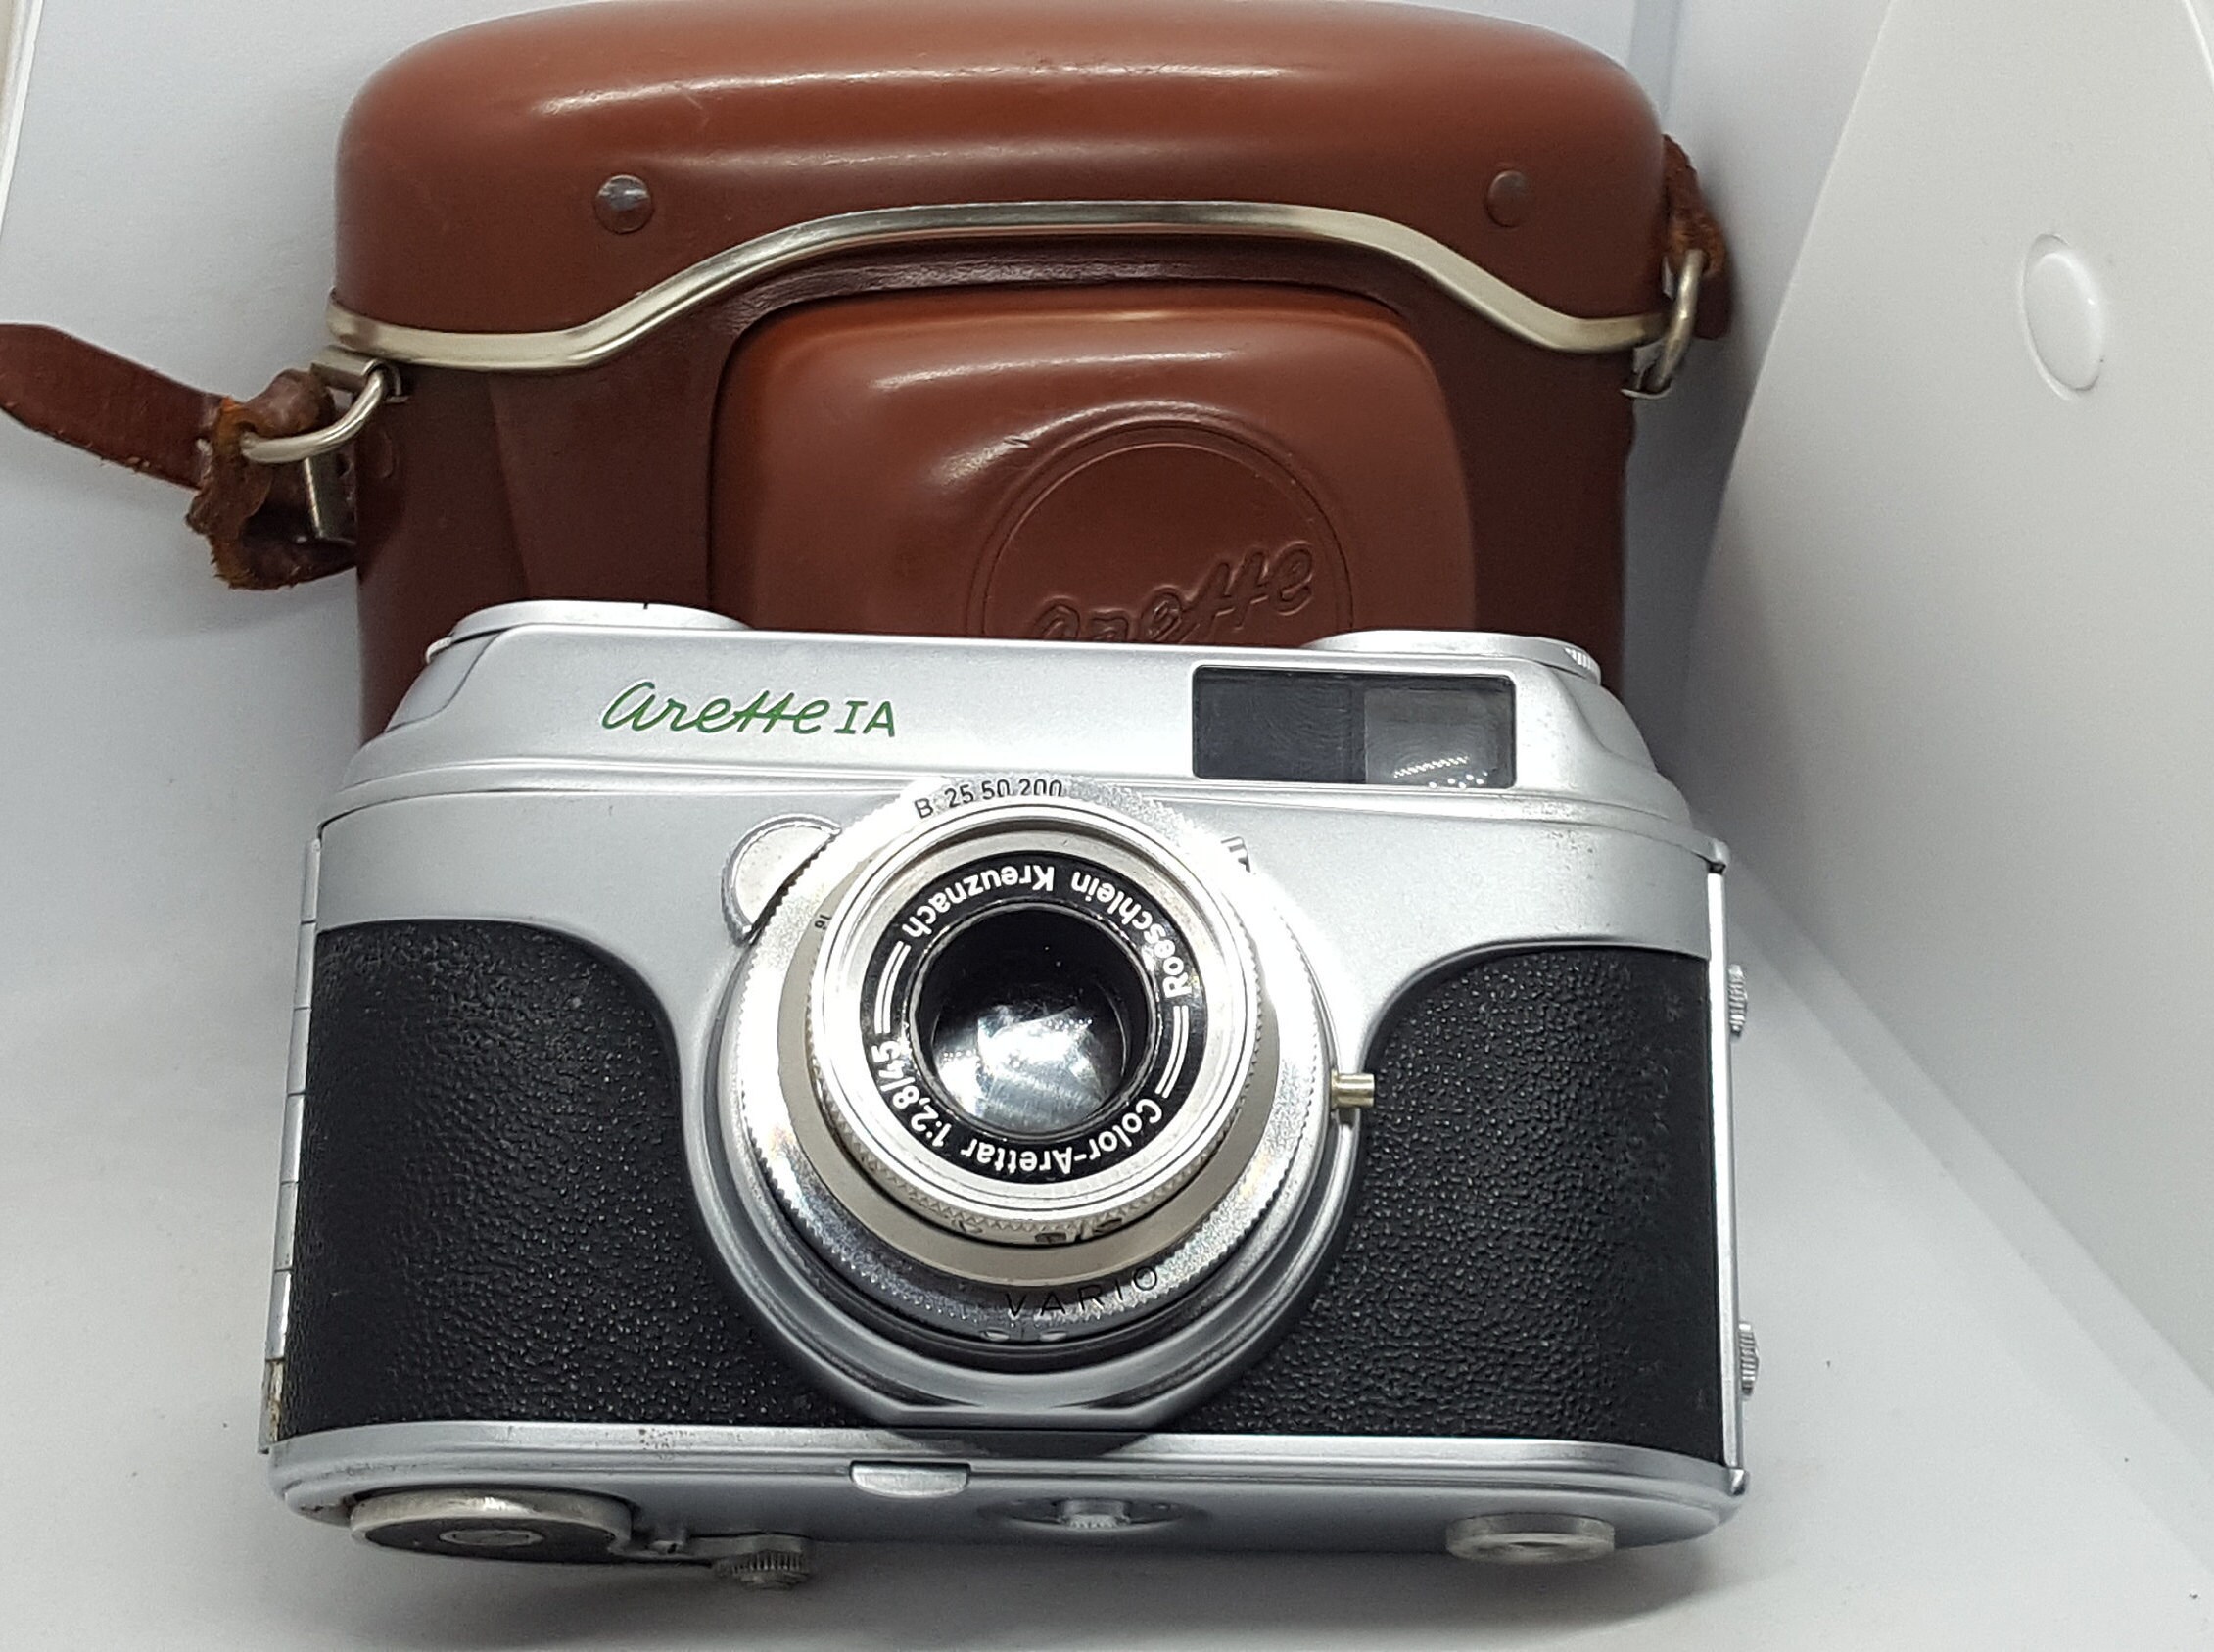 Vintage Arette IA camera w Roeschlein Kreuznach Color-Arettar Lens 1:2.845 made in Germany with case